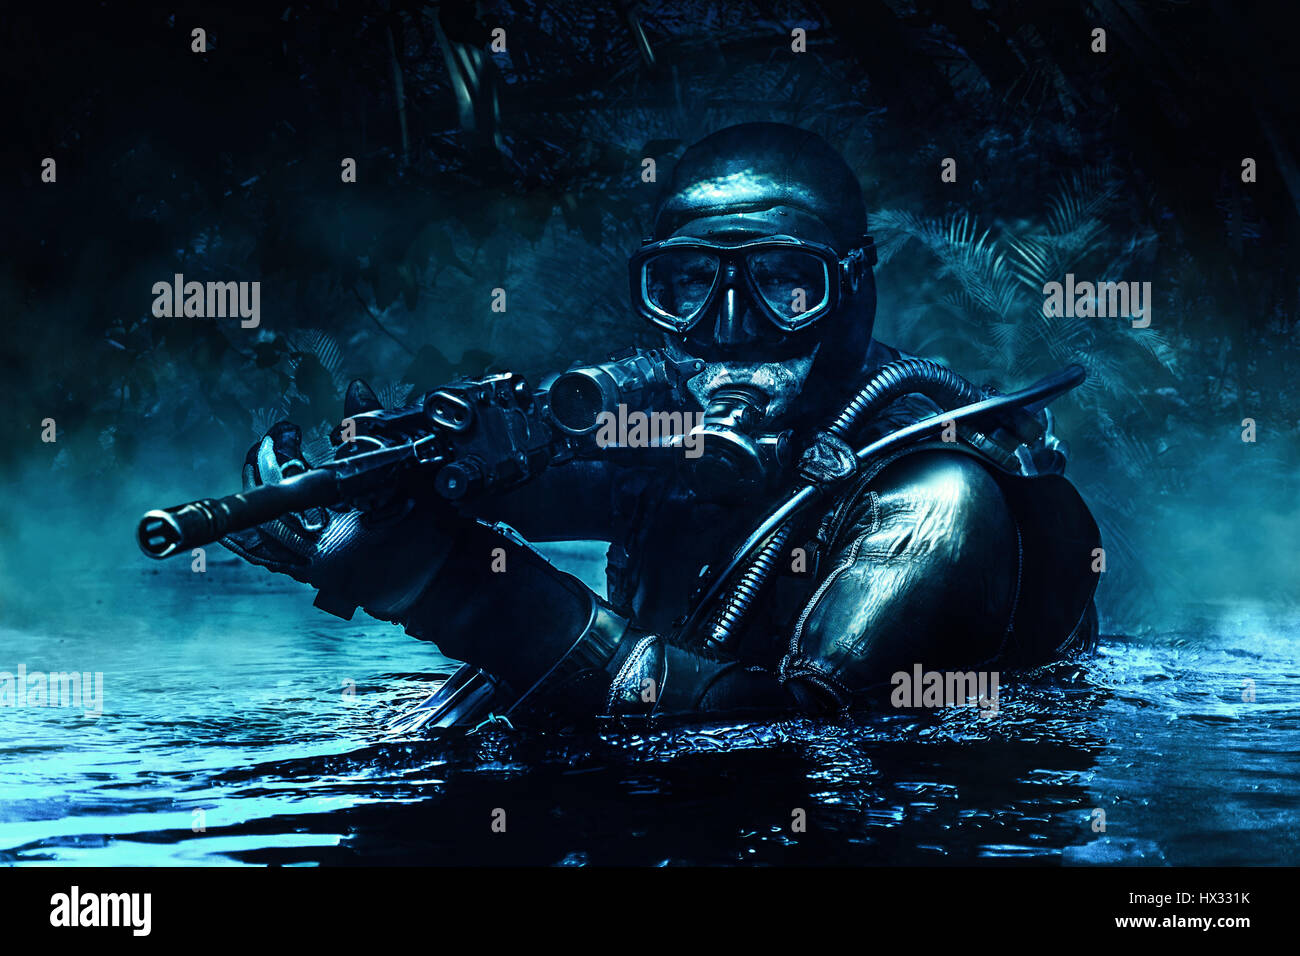 Frogman with weapons Stock Photo